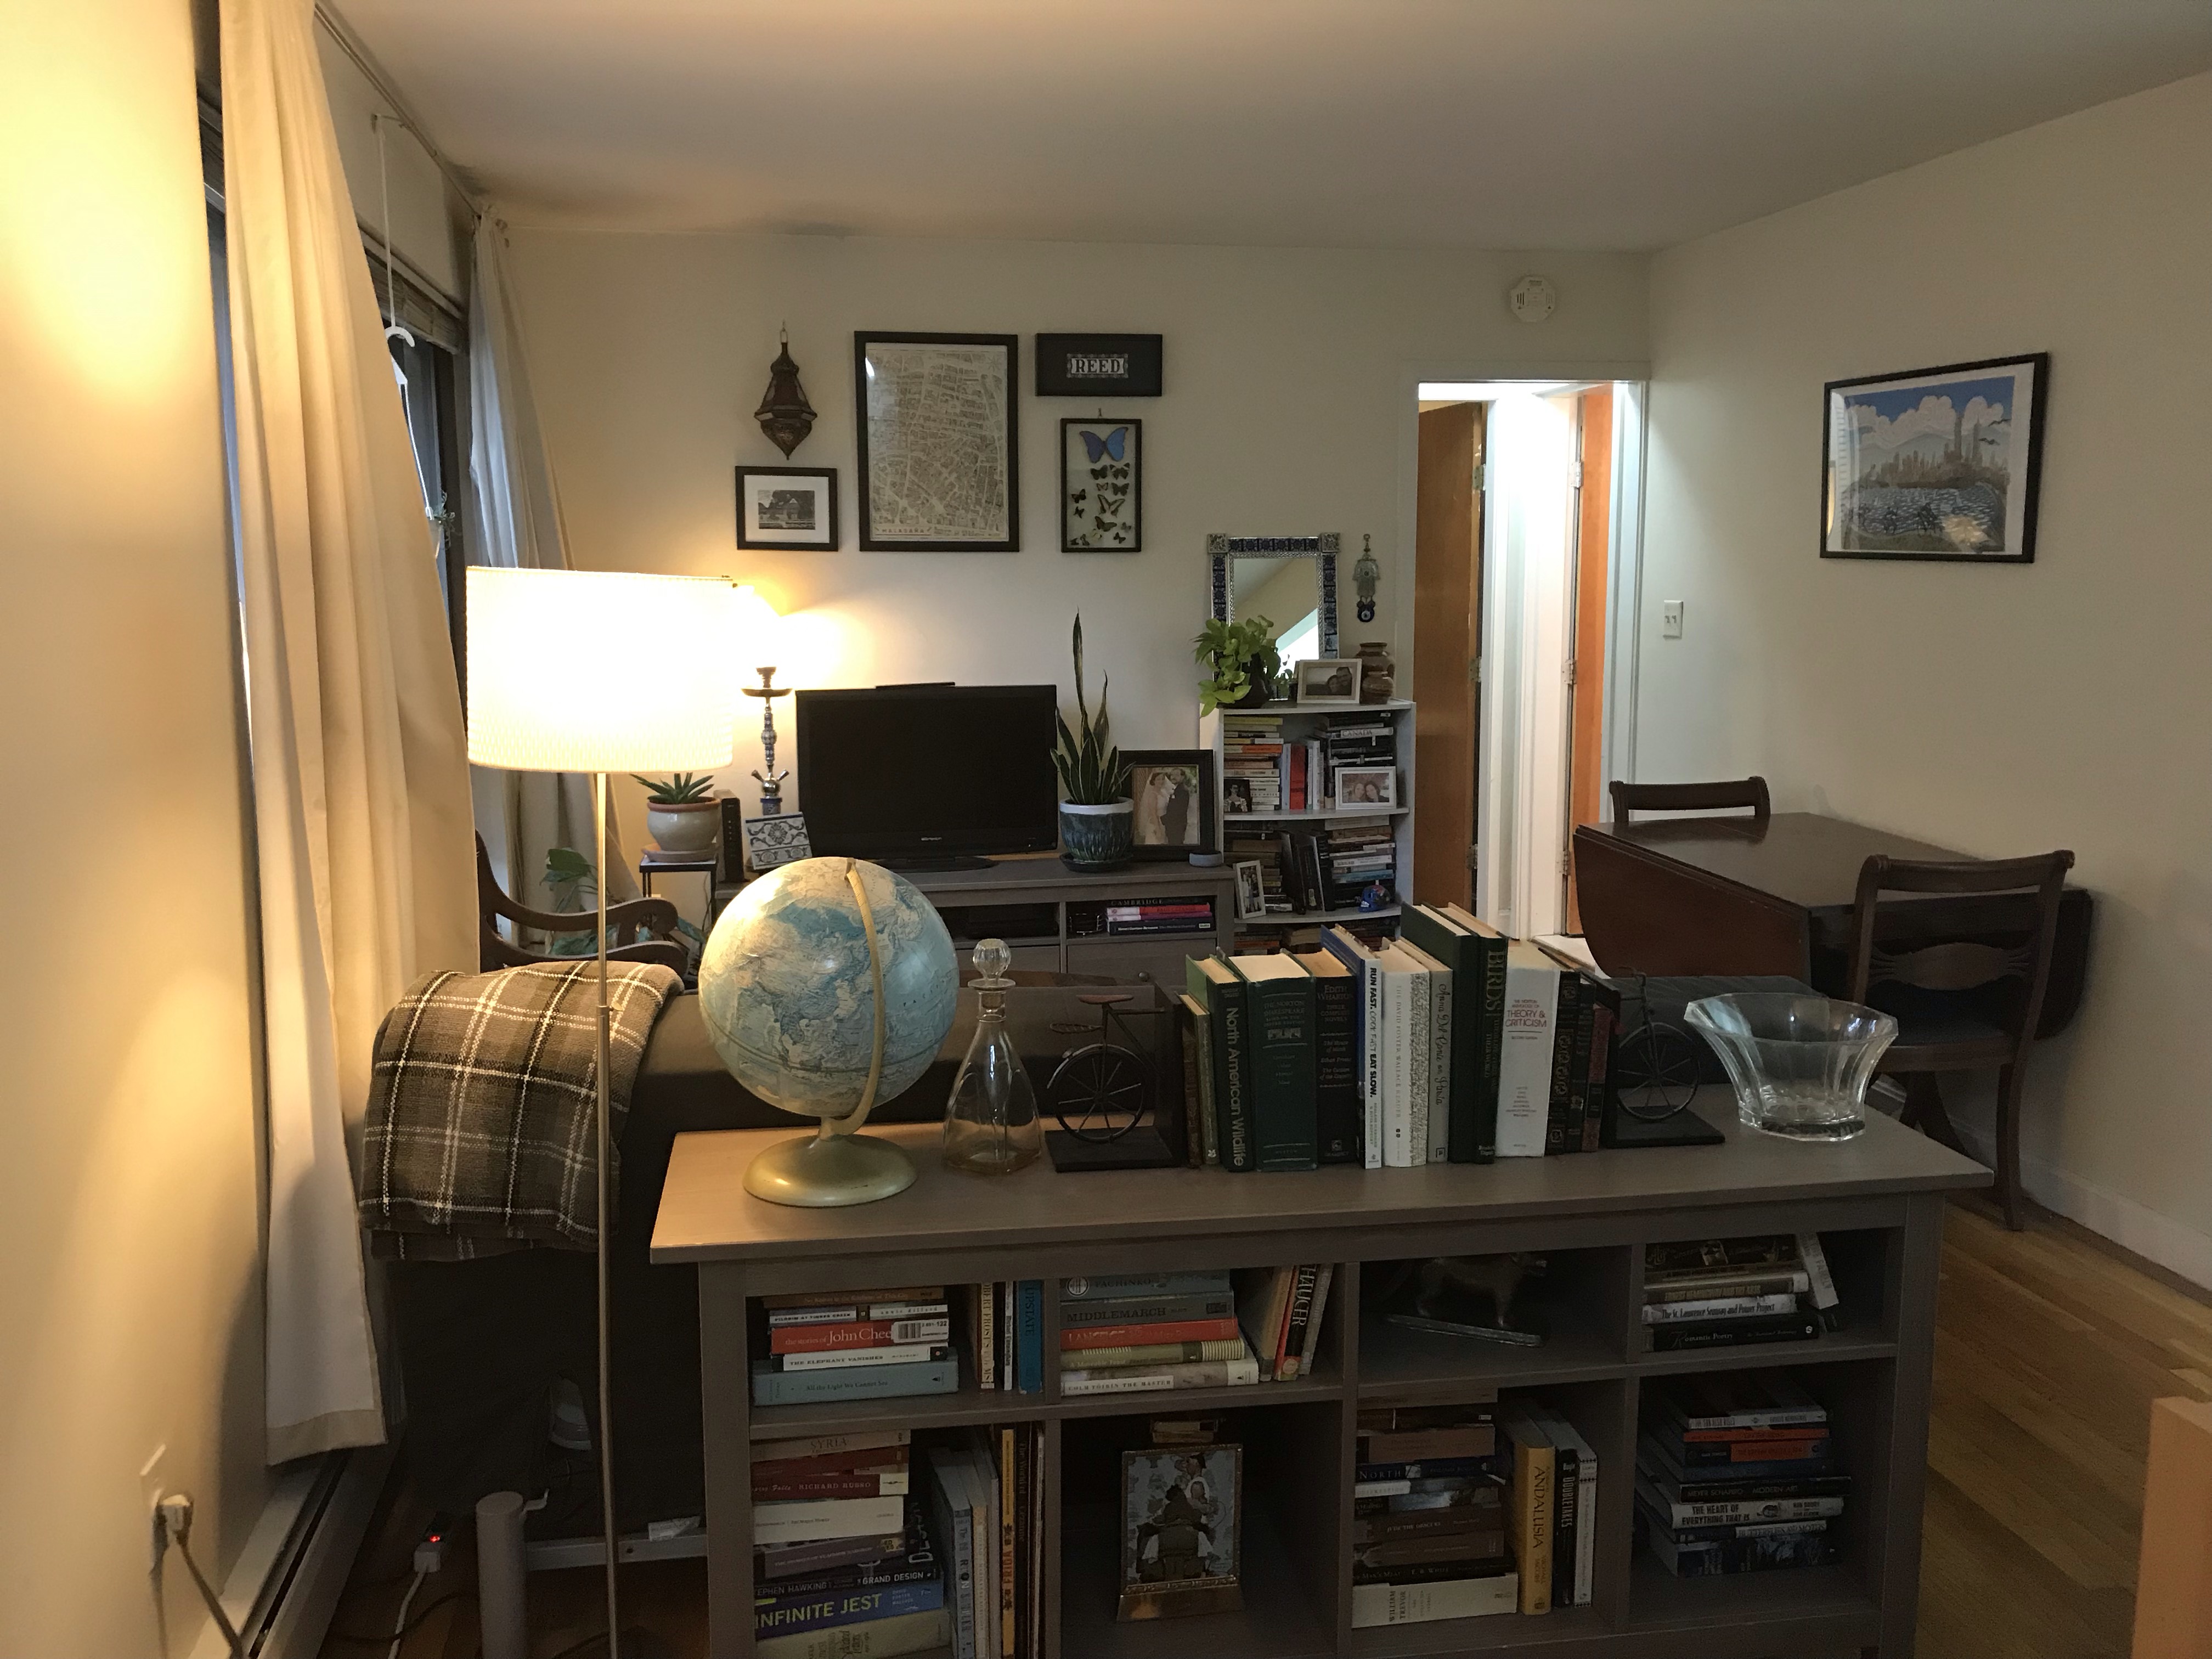 Pictures of  property for rent on Trowbridge St., Cambridge, MA 02138